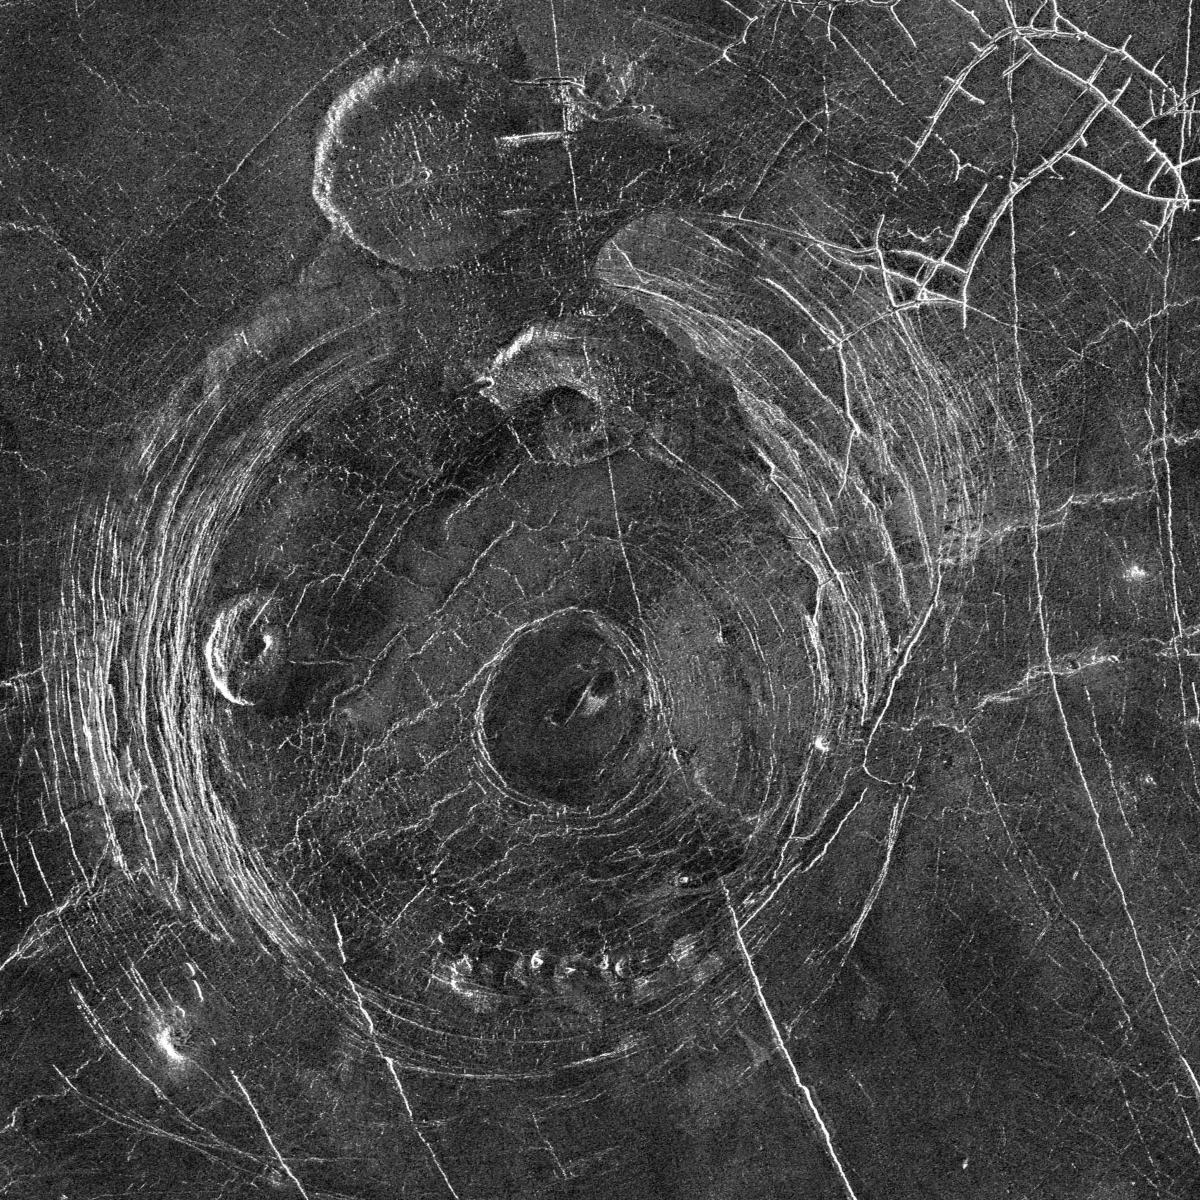 Aine Corona is 200 km (120 miles) in diameter. Above and to the left of the corona are two smaller, rounded 'pancake domes', and top right are fractures through which lava has flowed